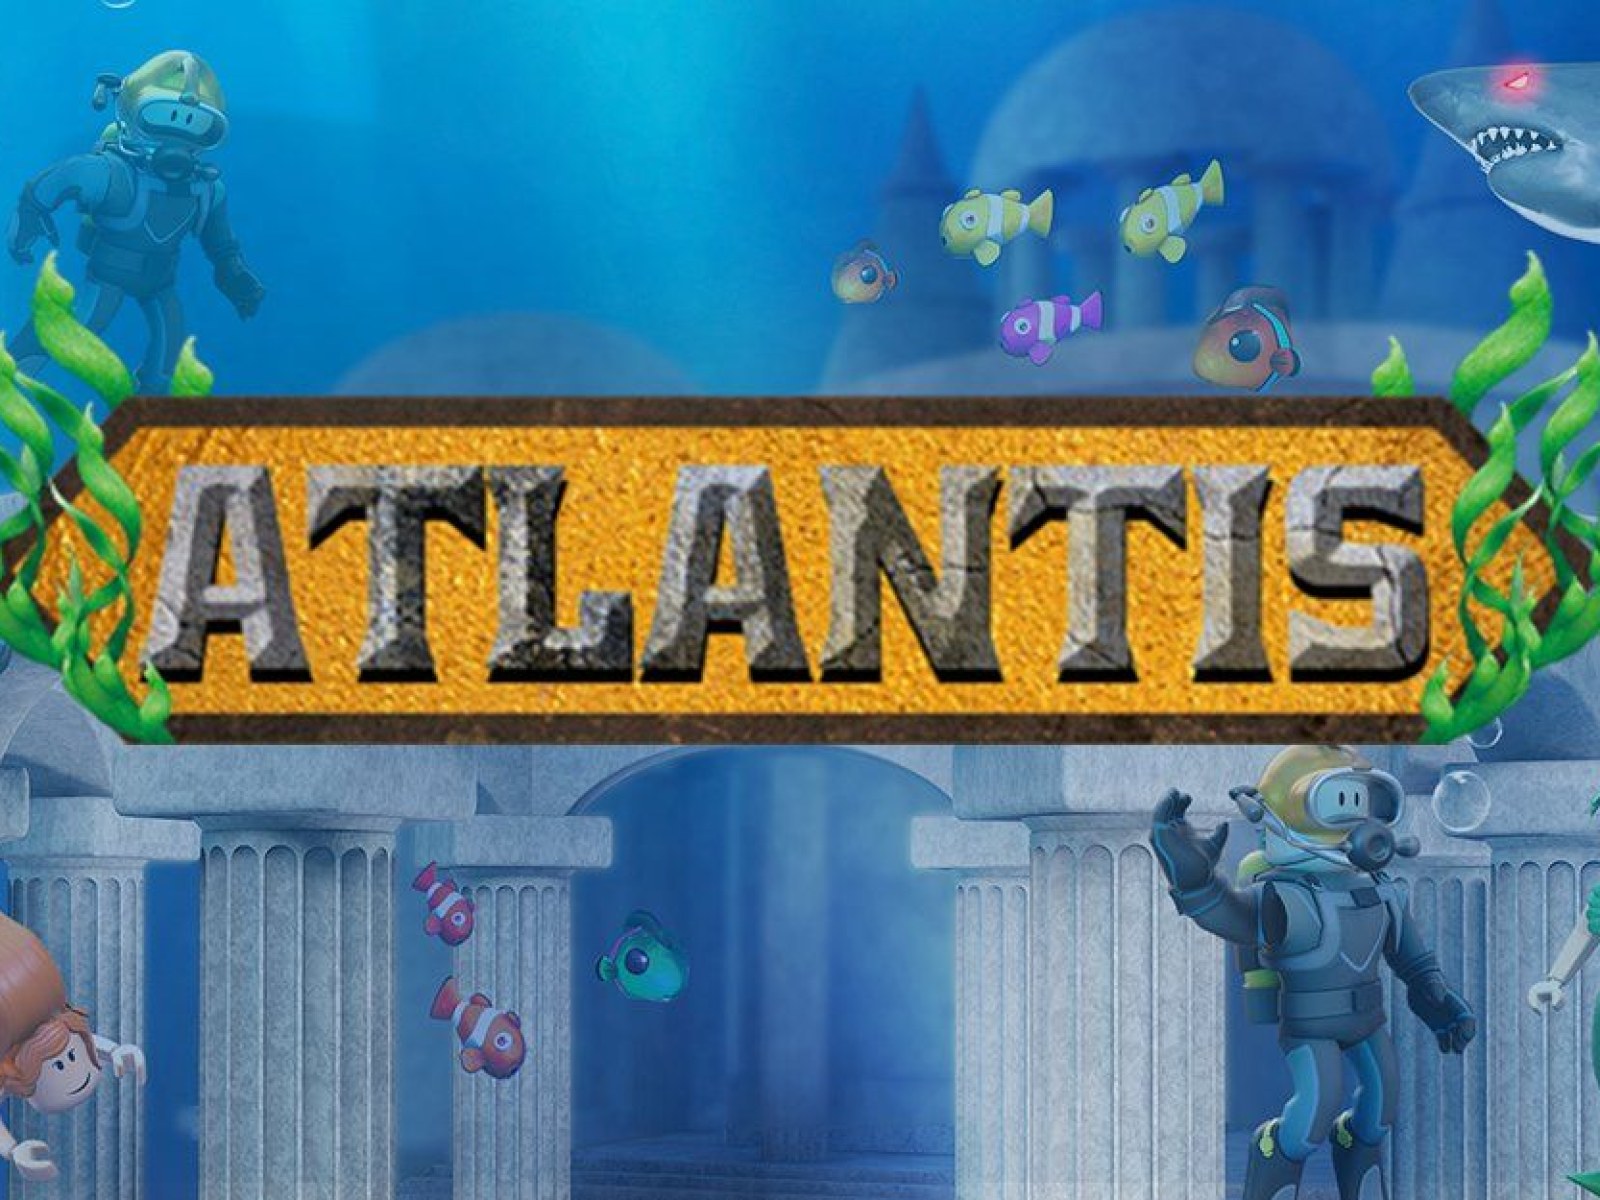 Roblox Atlantis Event Guide How To Get Atlantean Pauldrons And Tiara In Disaster Island Walkthrough - how to make a survival game in roblox 2018